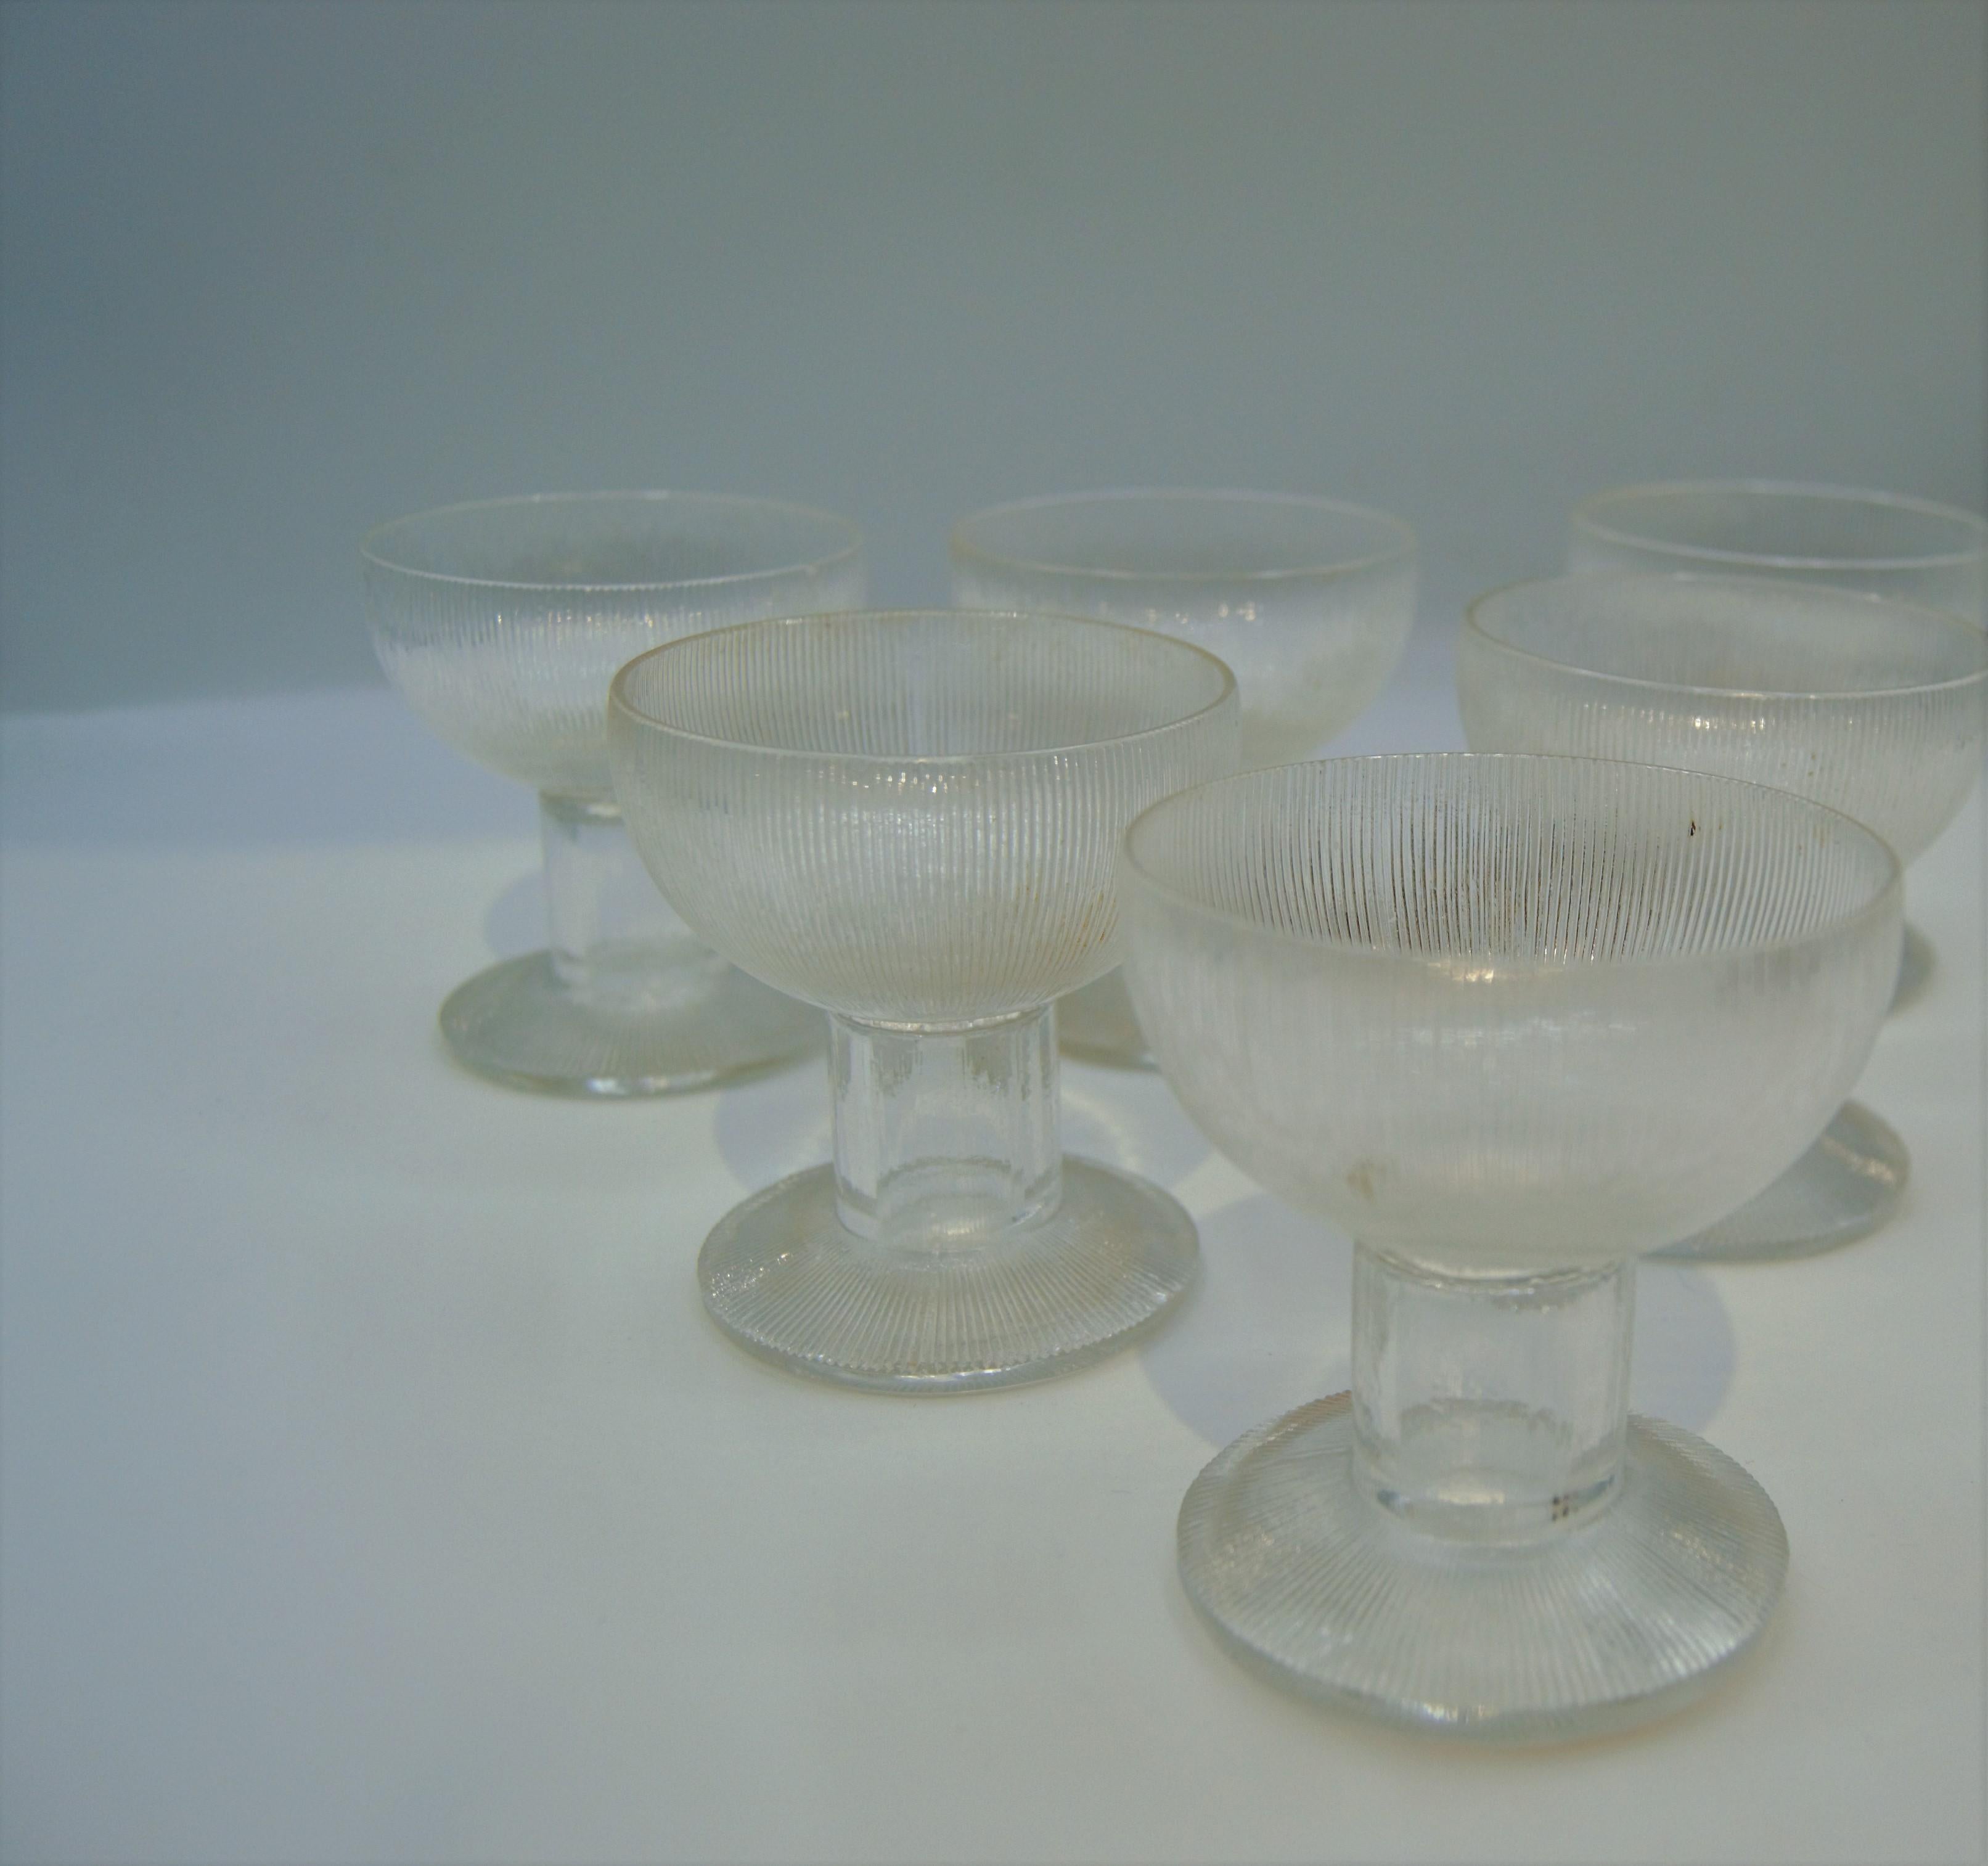 René Lalique glass Wingen: 6 glasses
frosted thin vertical ribbed top section on clear thick stem and a round base with matching design to the top of the Lalique glass
Measures: Height 2.76 in / 7 cm
Model: 5109,
circa 1926.
  